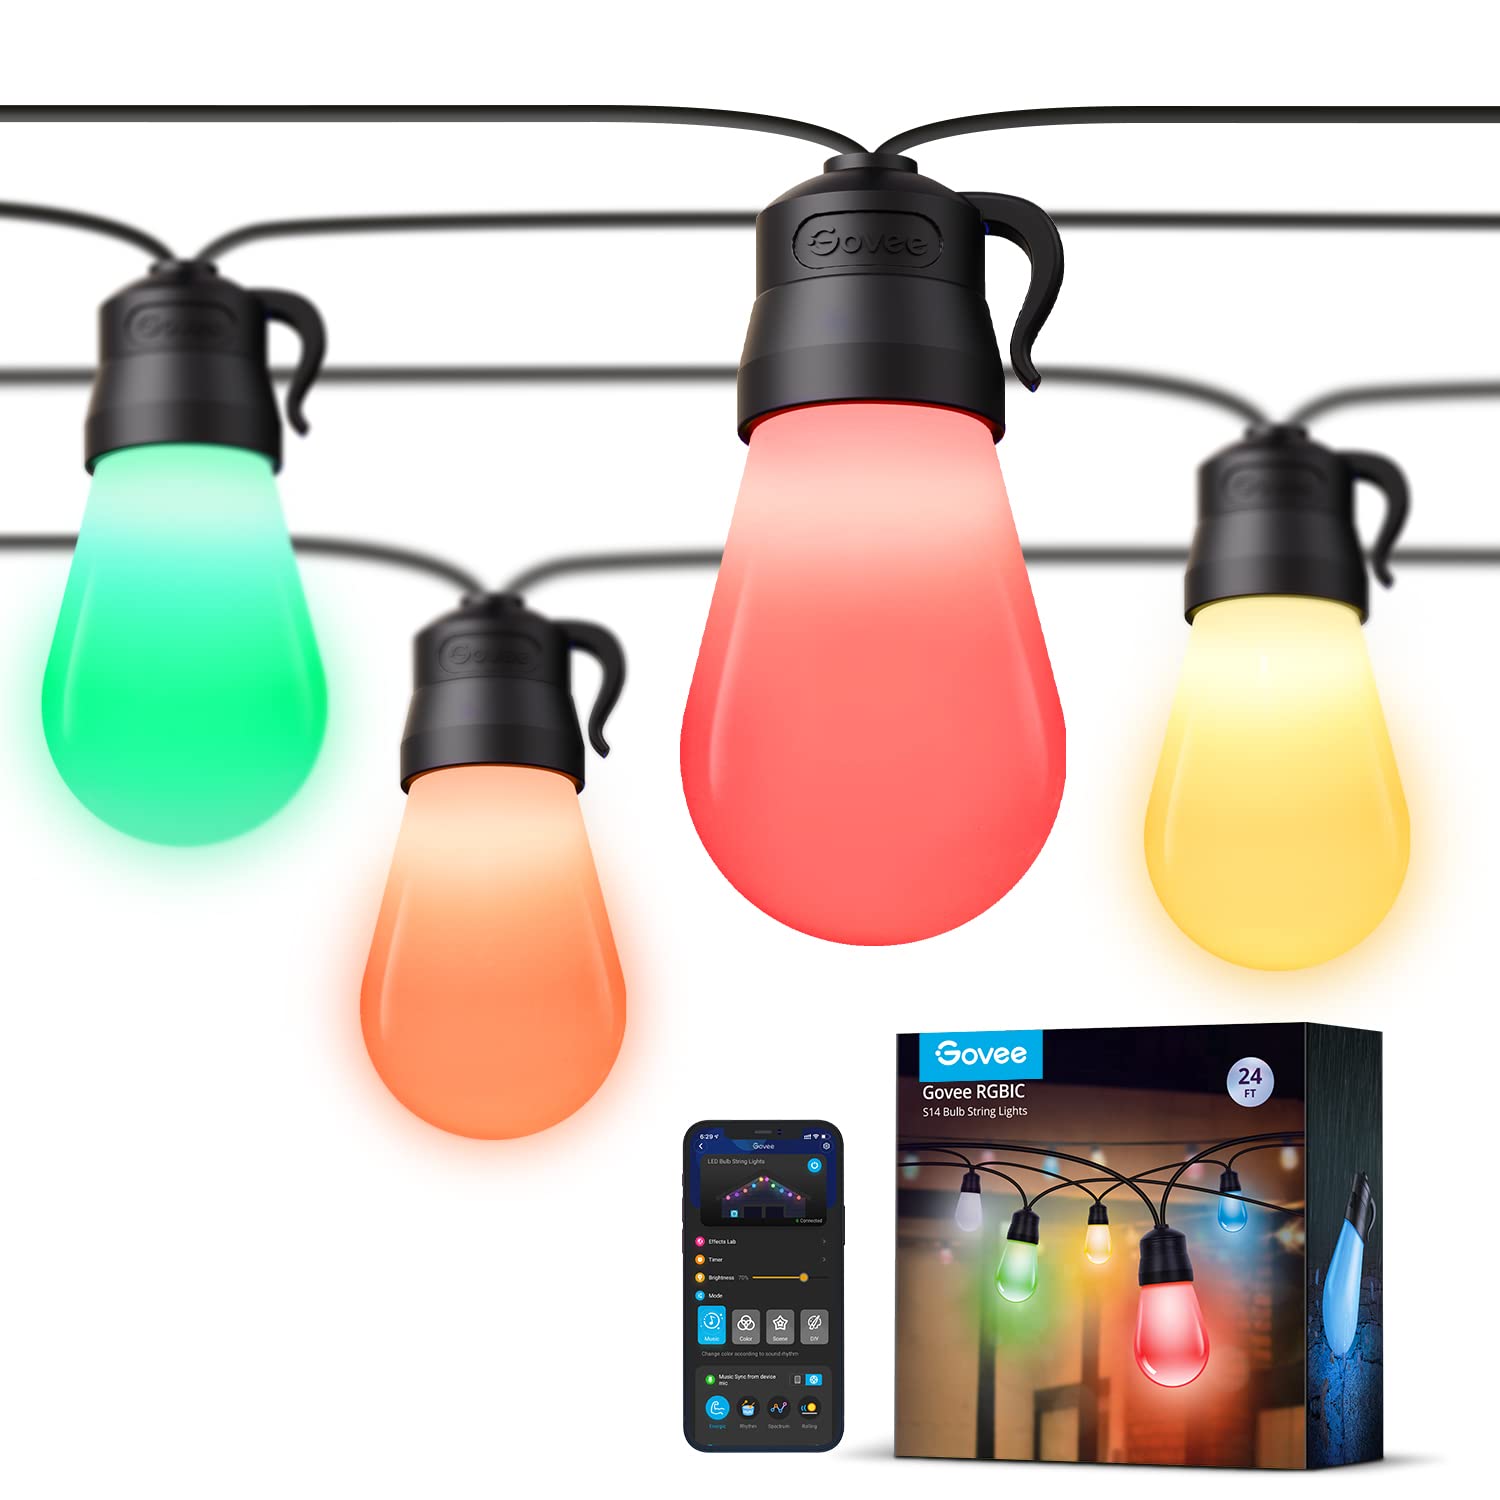 Govee Smart Outdoor String Lights with 8 Dimmable RGBIC LED Bulbs, 24ft IP65 Waterproof Shatterproof Patio Lights, Color Changing Warm White Lights with 47 Scene Modes for Balcony, Backyard, Party